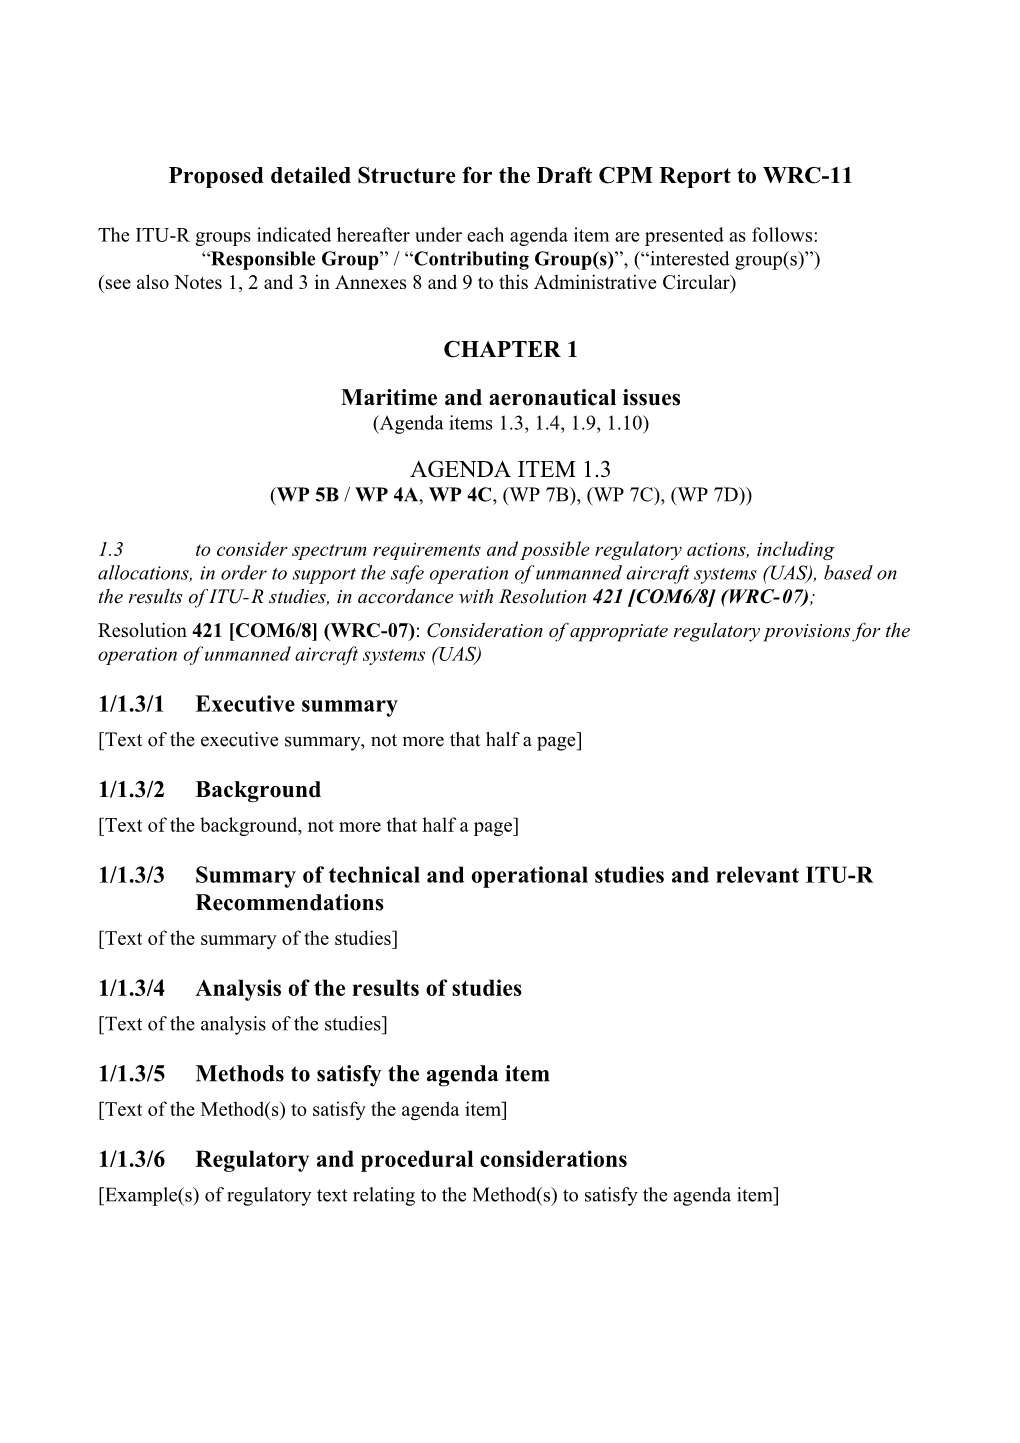 Table of Contents of the Cpm-11 Report, Cpm-11 Chapter Rapporteurs and Outline of the Draft